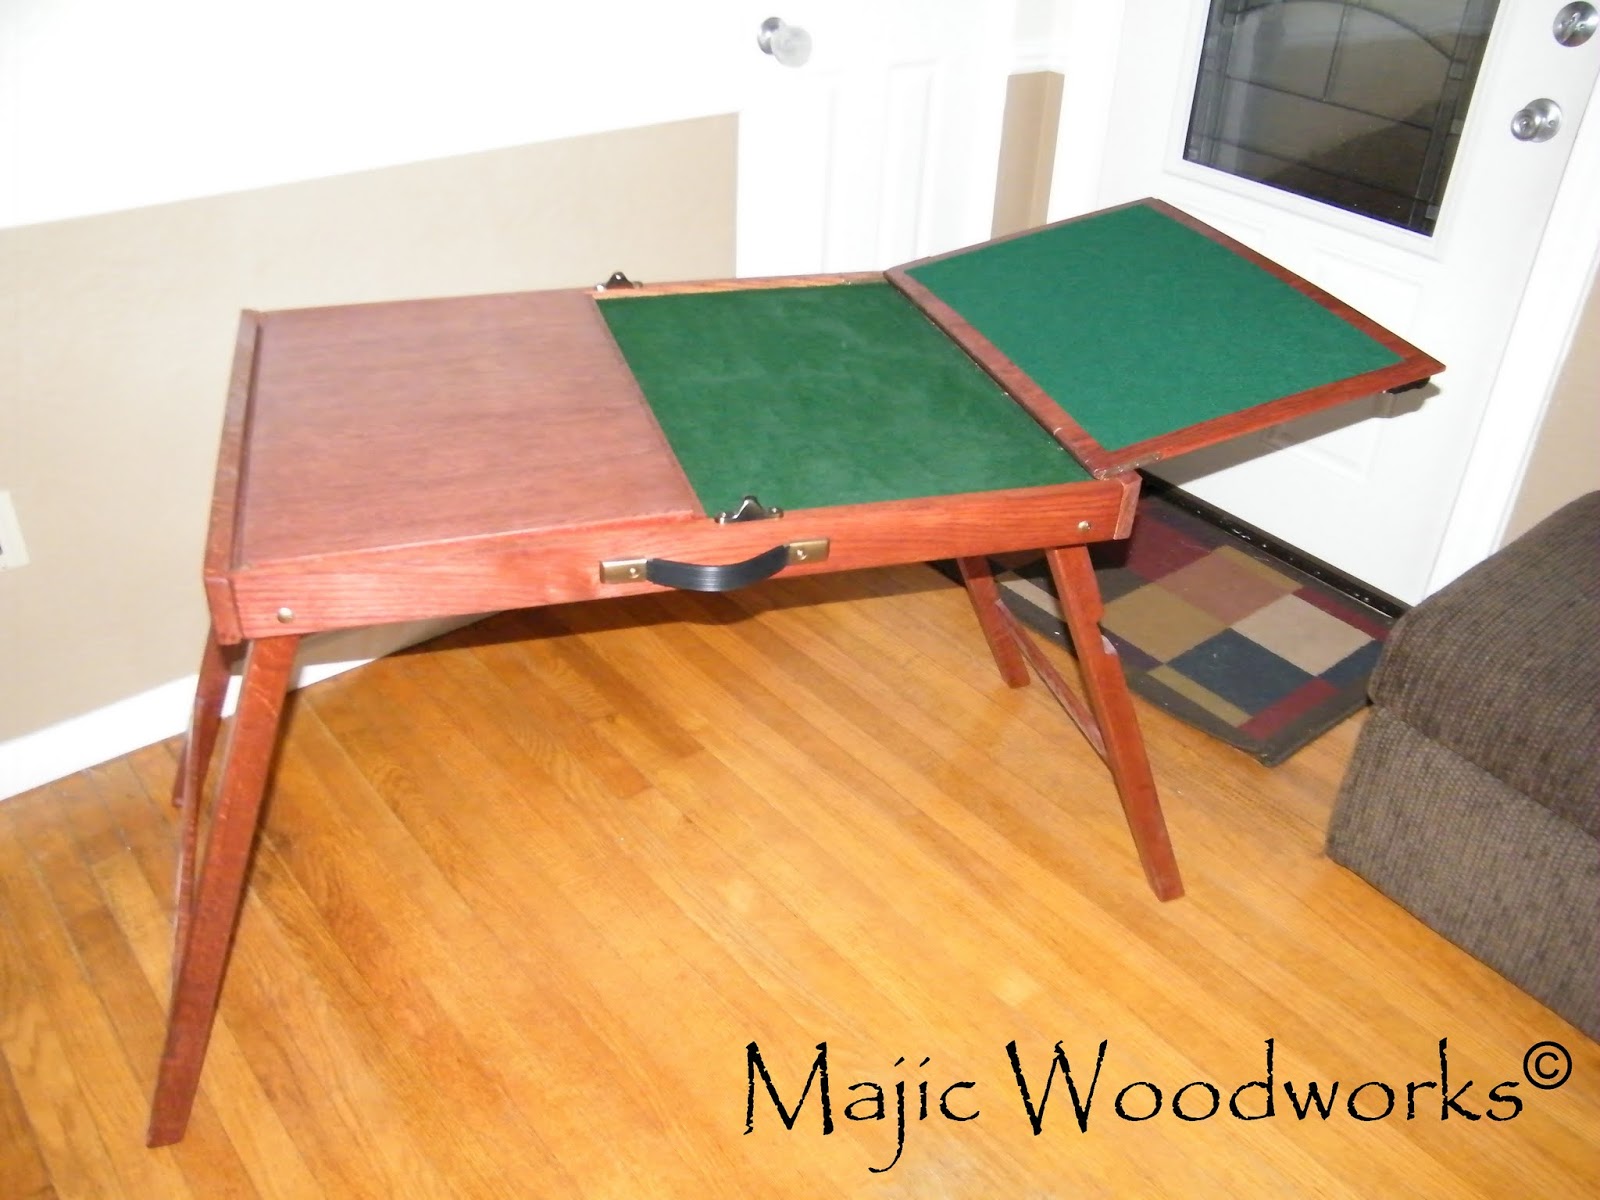 Majic Woodworks - An Adventure In Woodworking: Jigsaw Puzzle Table